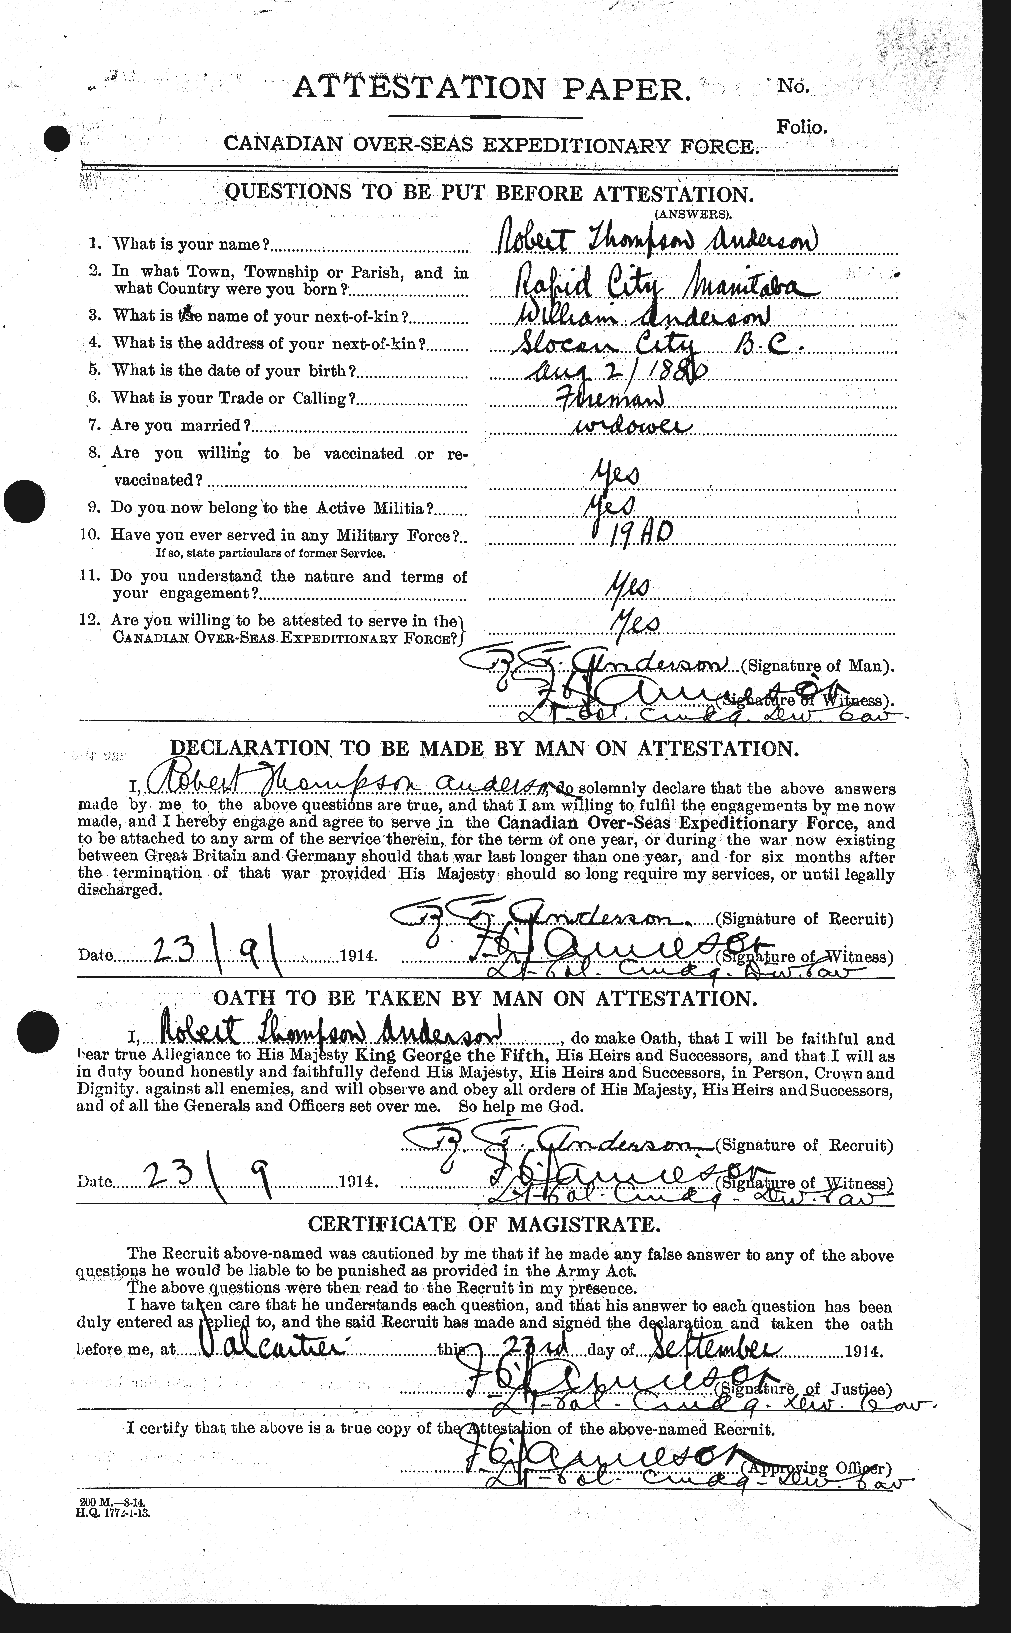 Personnel Records of the First World War - CEF 207223a